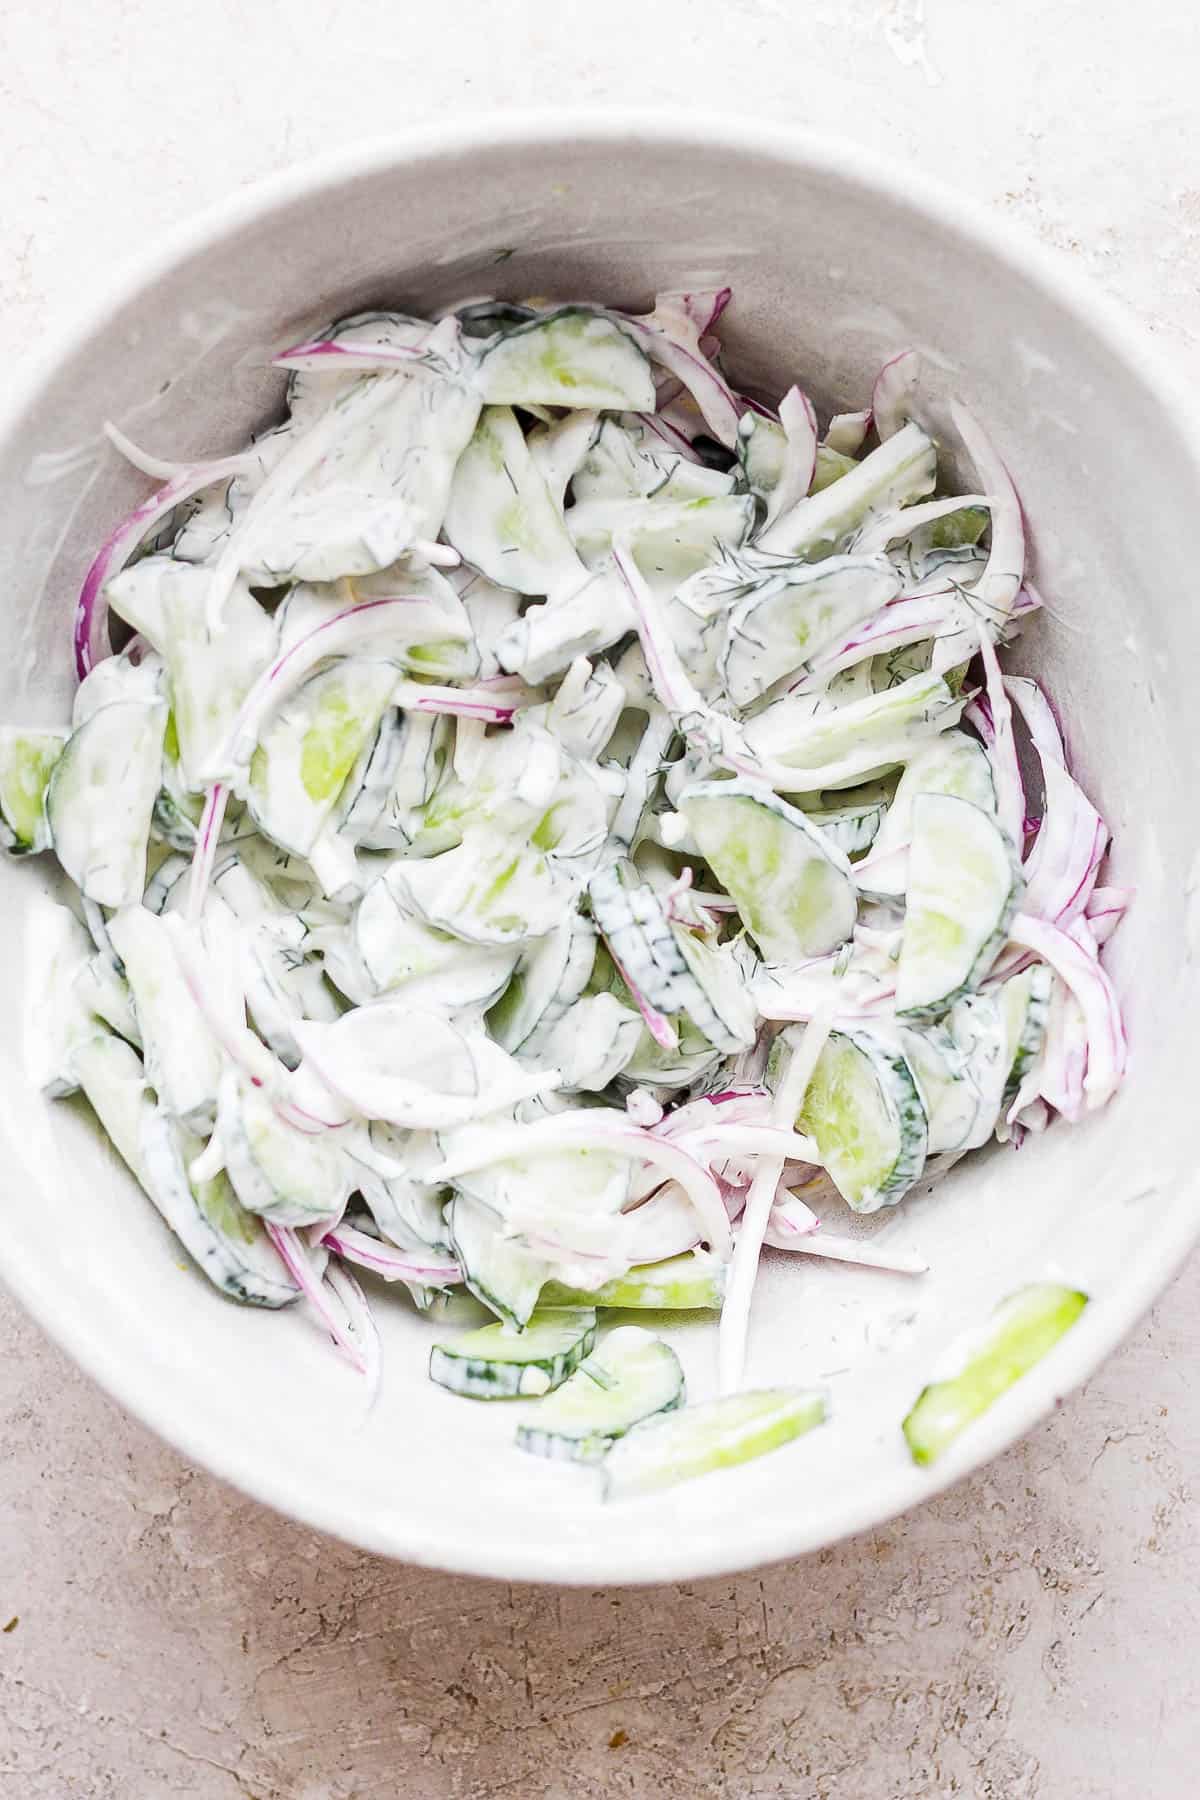 All of the cream cucumber salad ingredients tossed together in the large bowl.